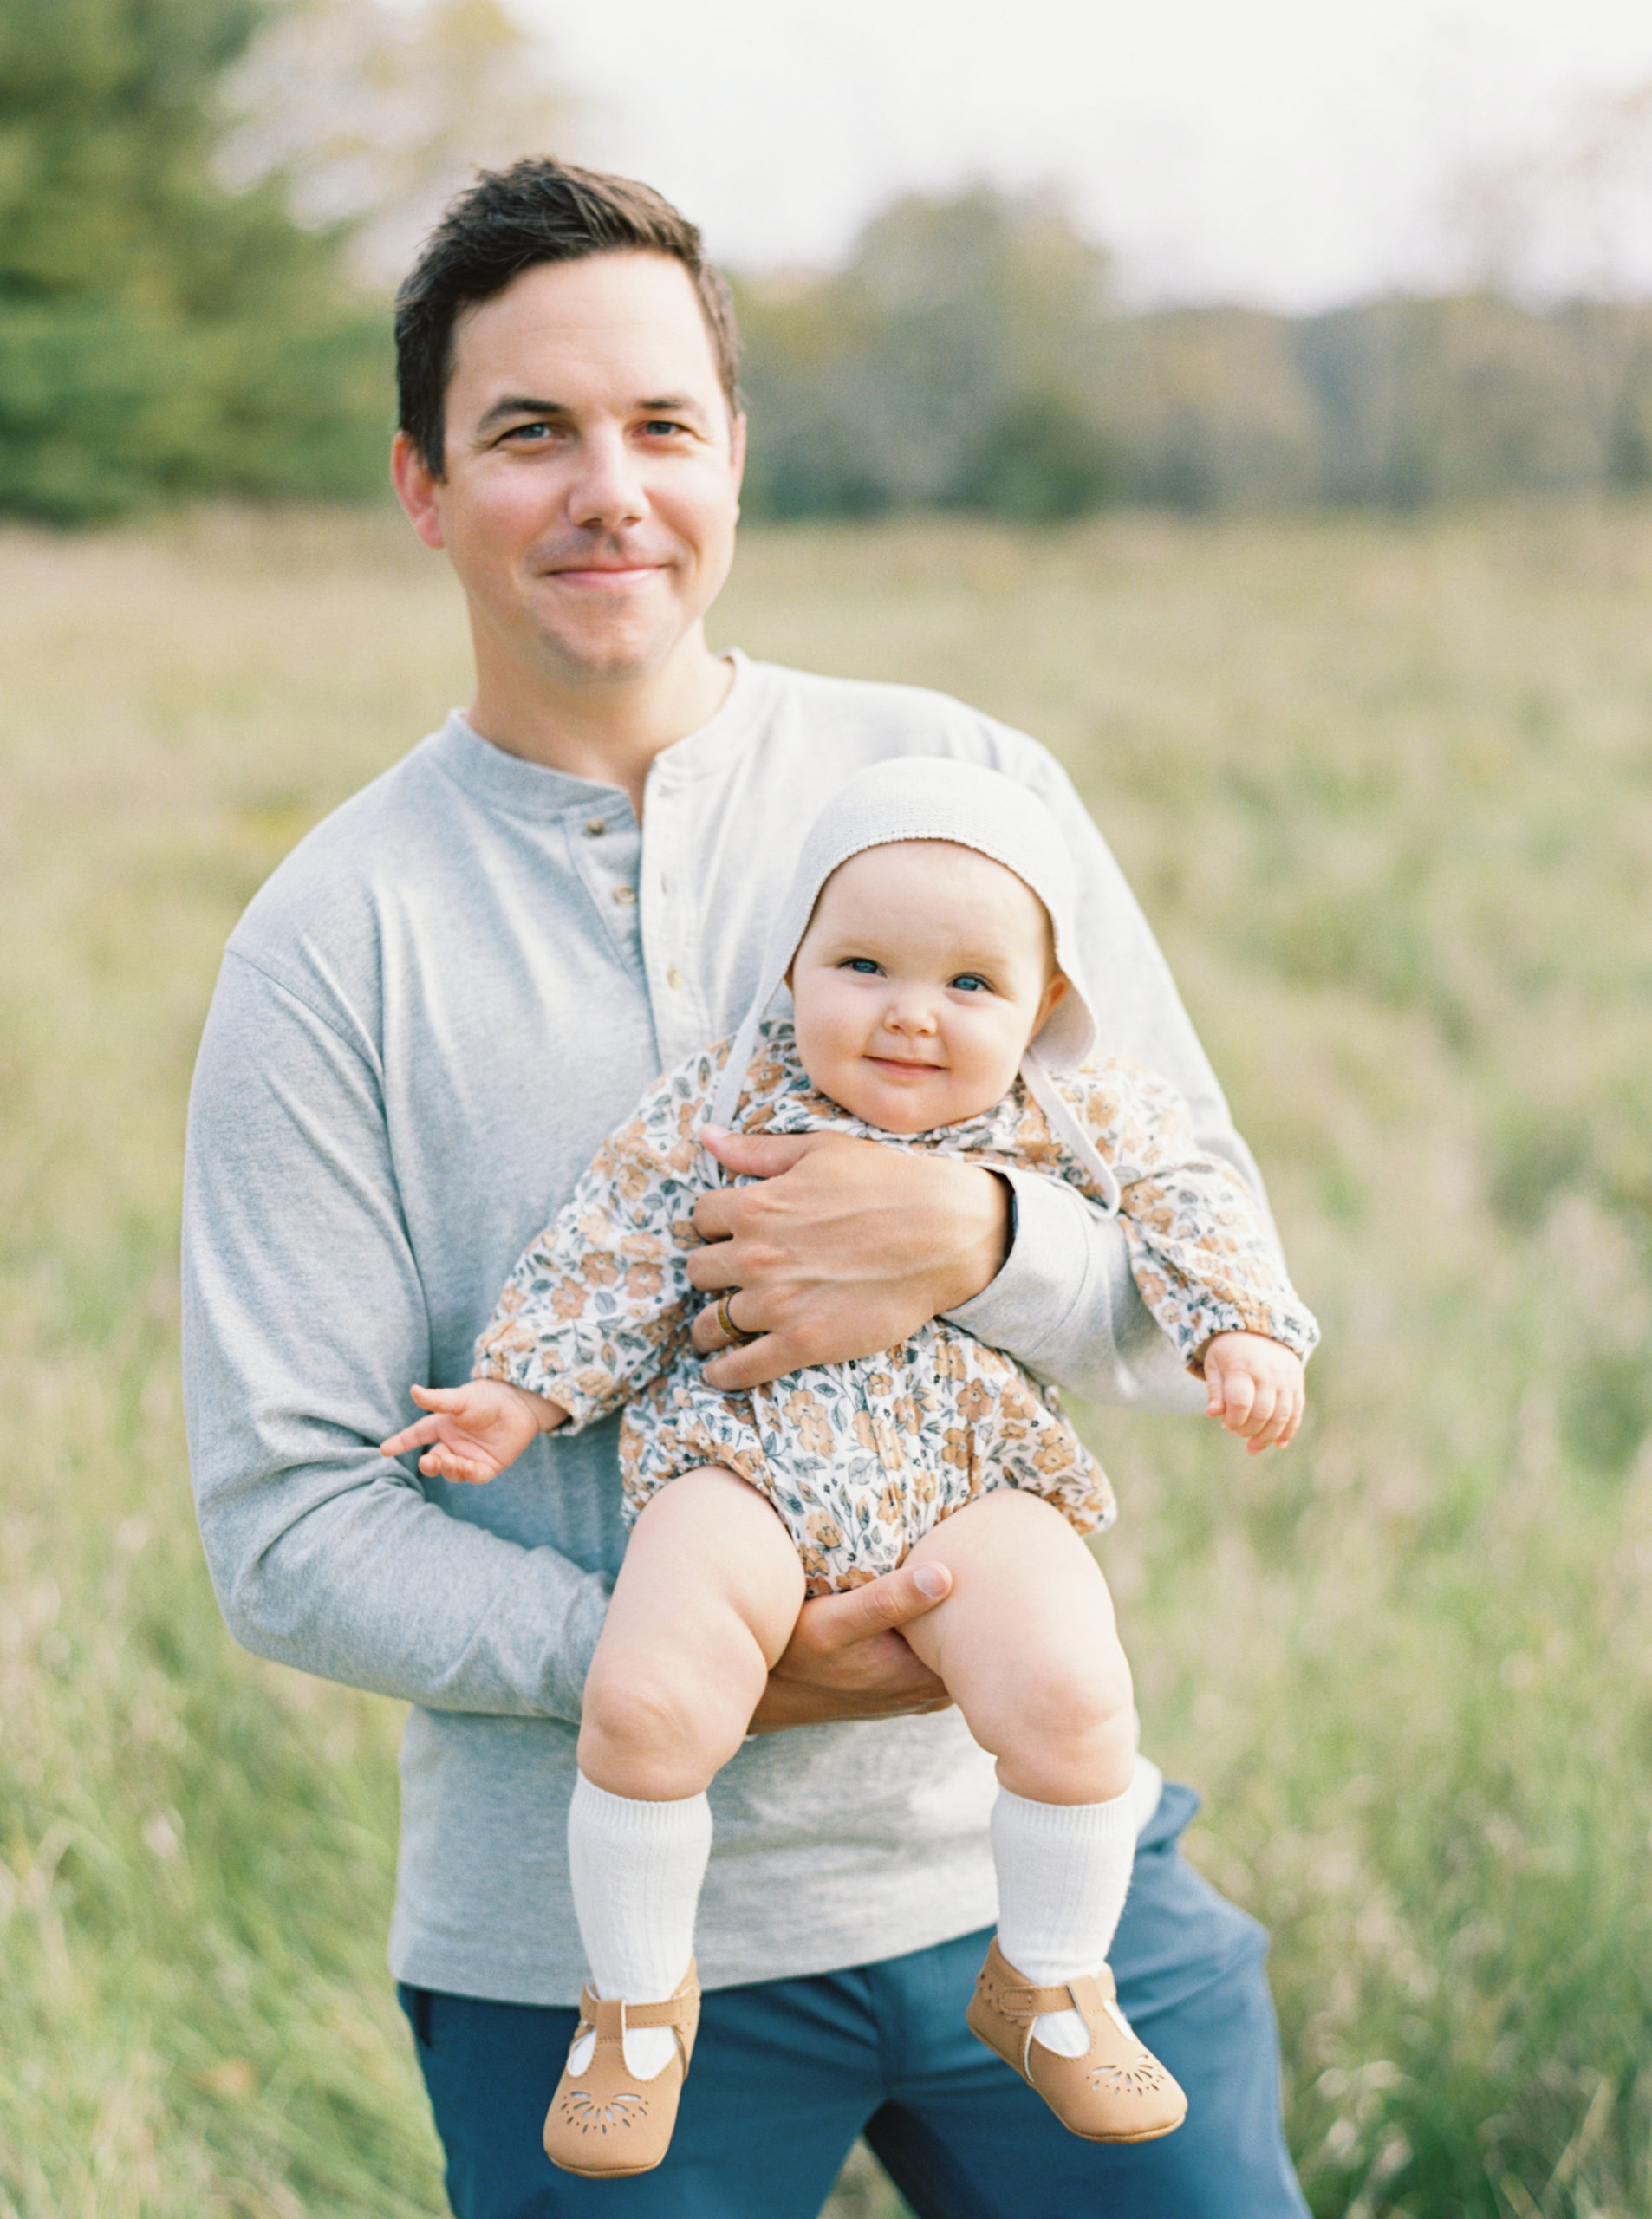 A father cuddles his baby in a grassy Hartland field on a beautiful Fall afternoon